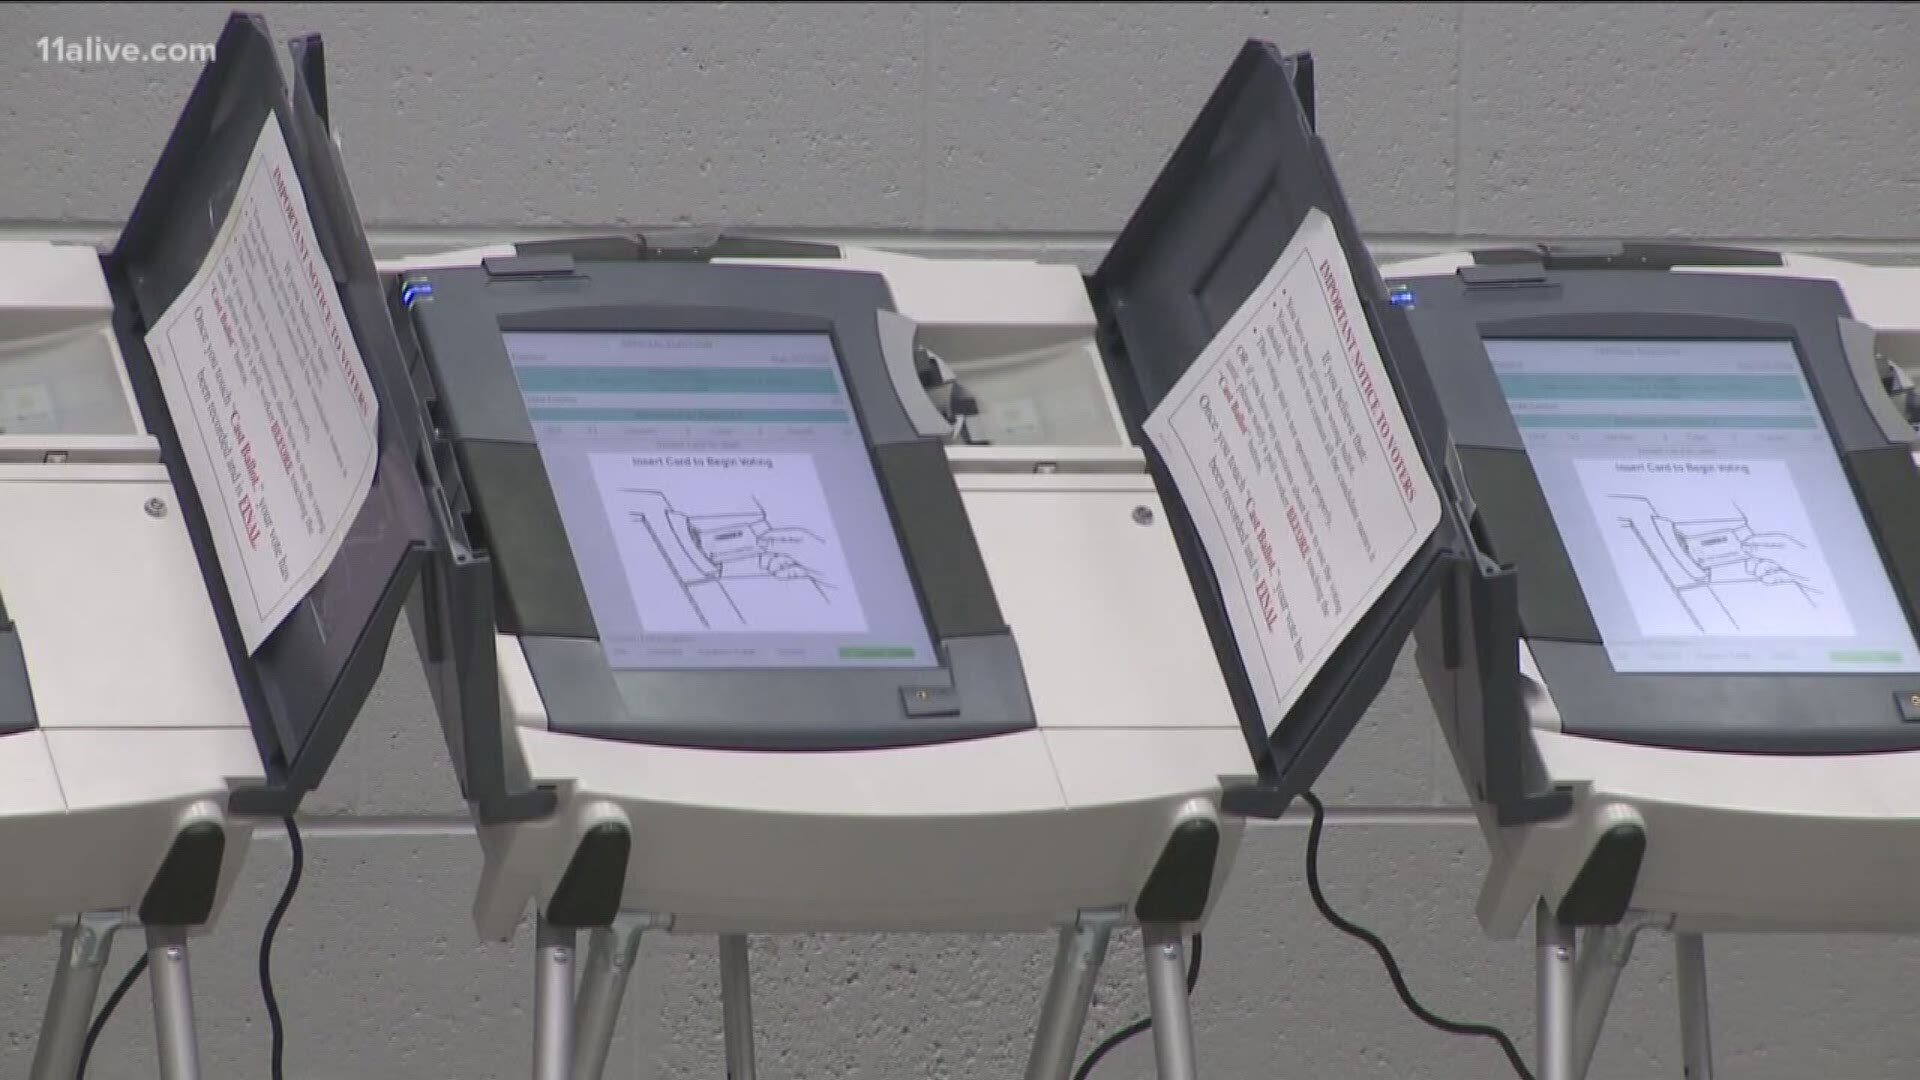 The bill was introduced Monday, calling for a system that combines computer voting and paper ballots.